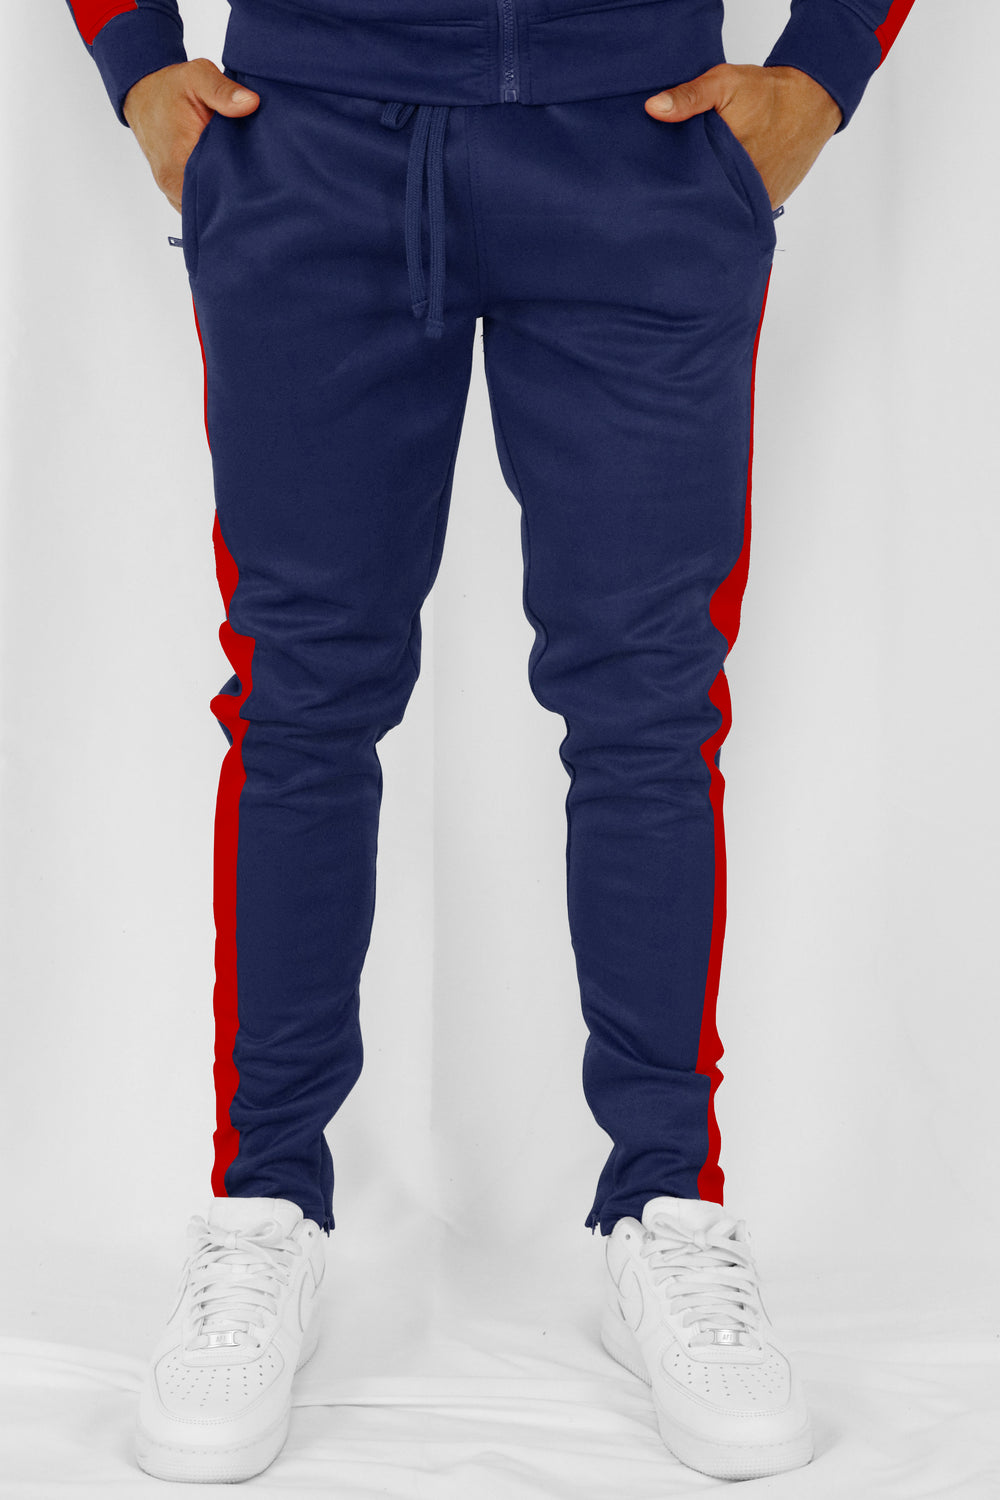 Outside Solid One Stripe Track Pants (Navy - Red) (100-402) - Zamage